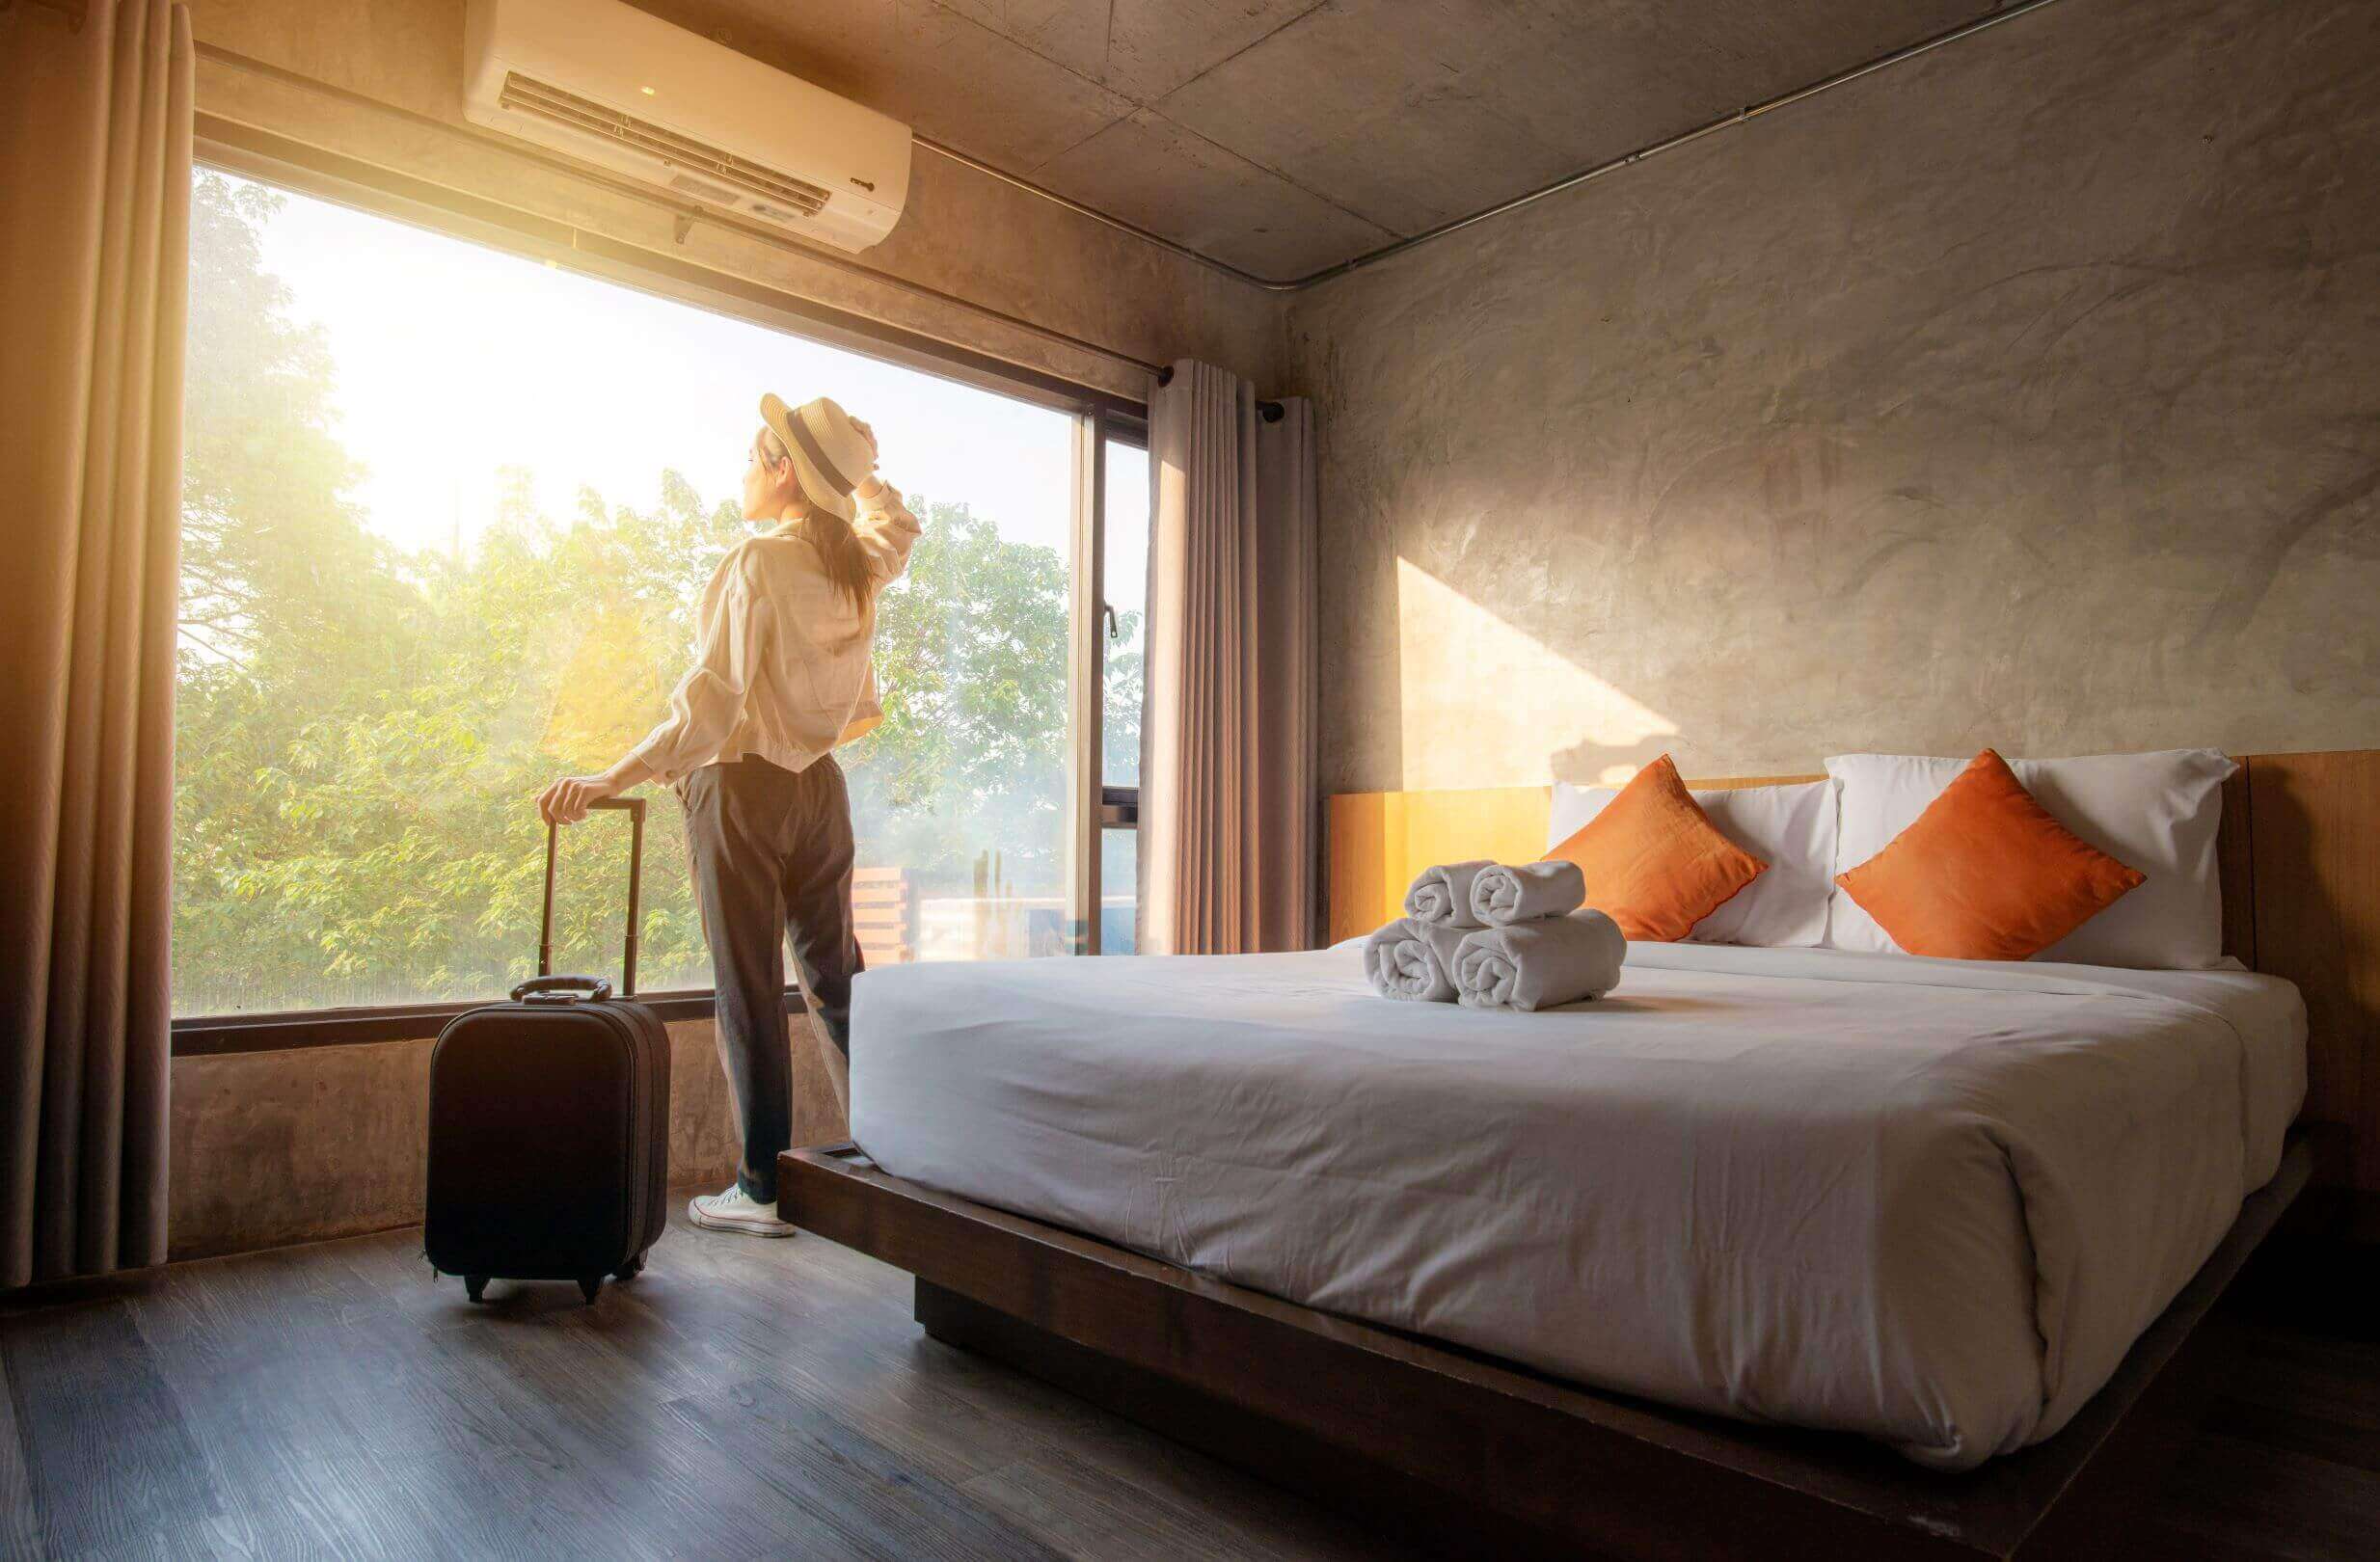 Tourist woman with her luggage in hotel bedroom